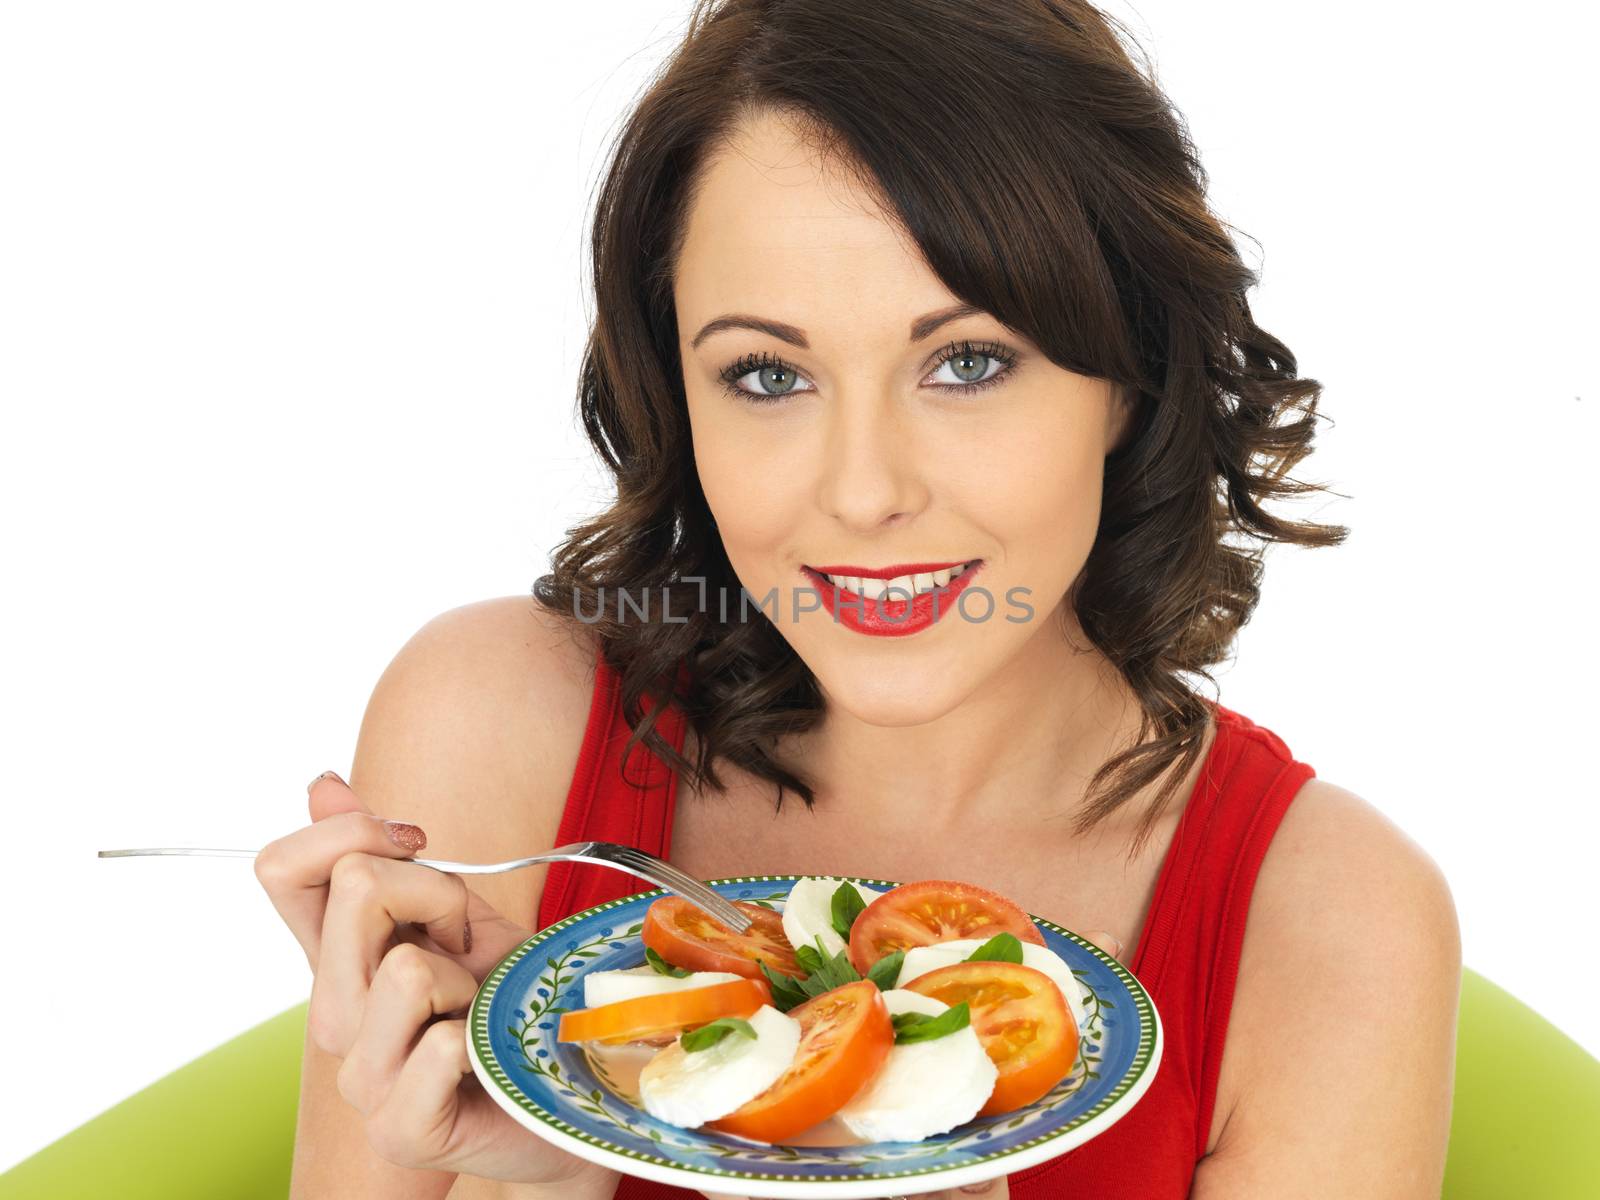 Young Healthy Woman Eating a Mozzarella Cheese and Tomato Salad